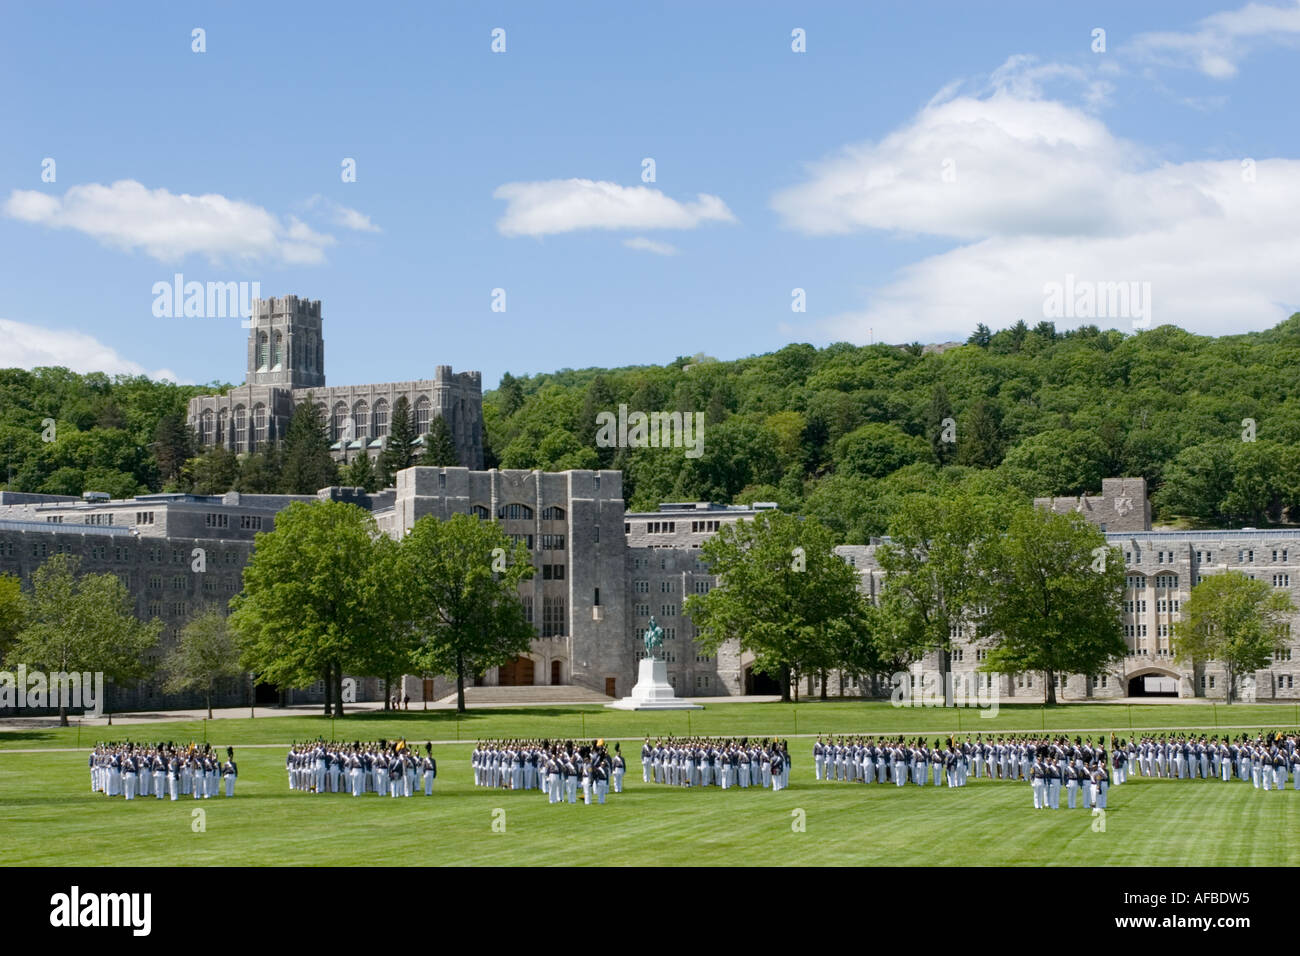 Cadets march on The Plain annual Alumni Review United States Military Academy at West Point Hudson Valley New York Stock Photo